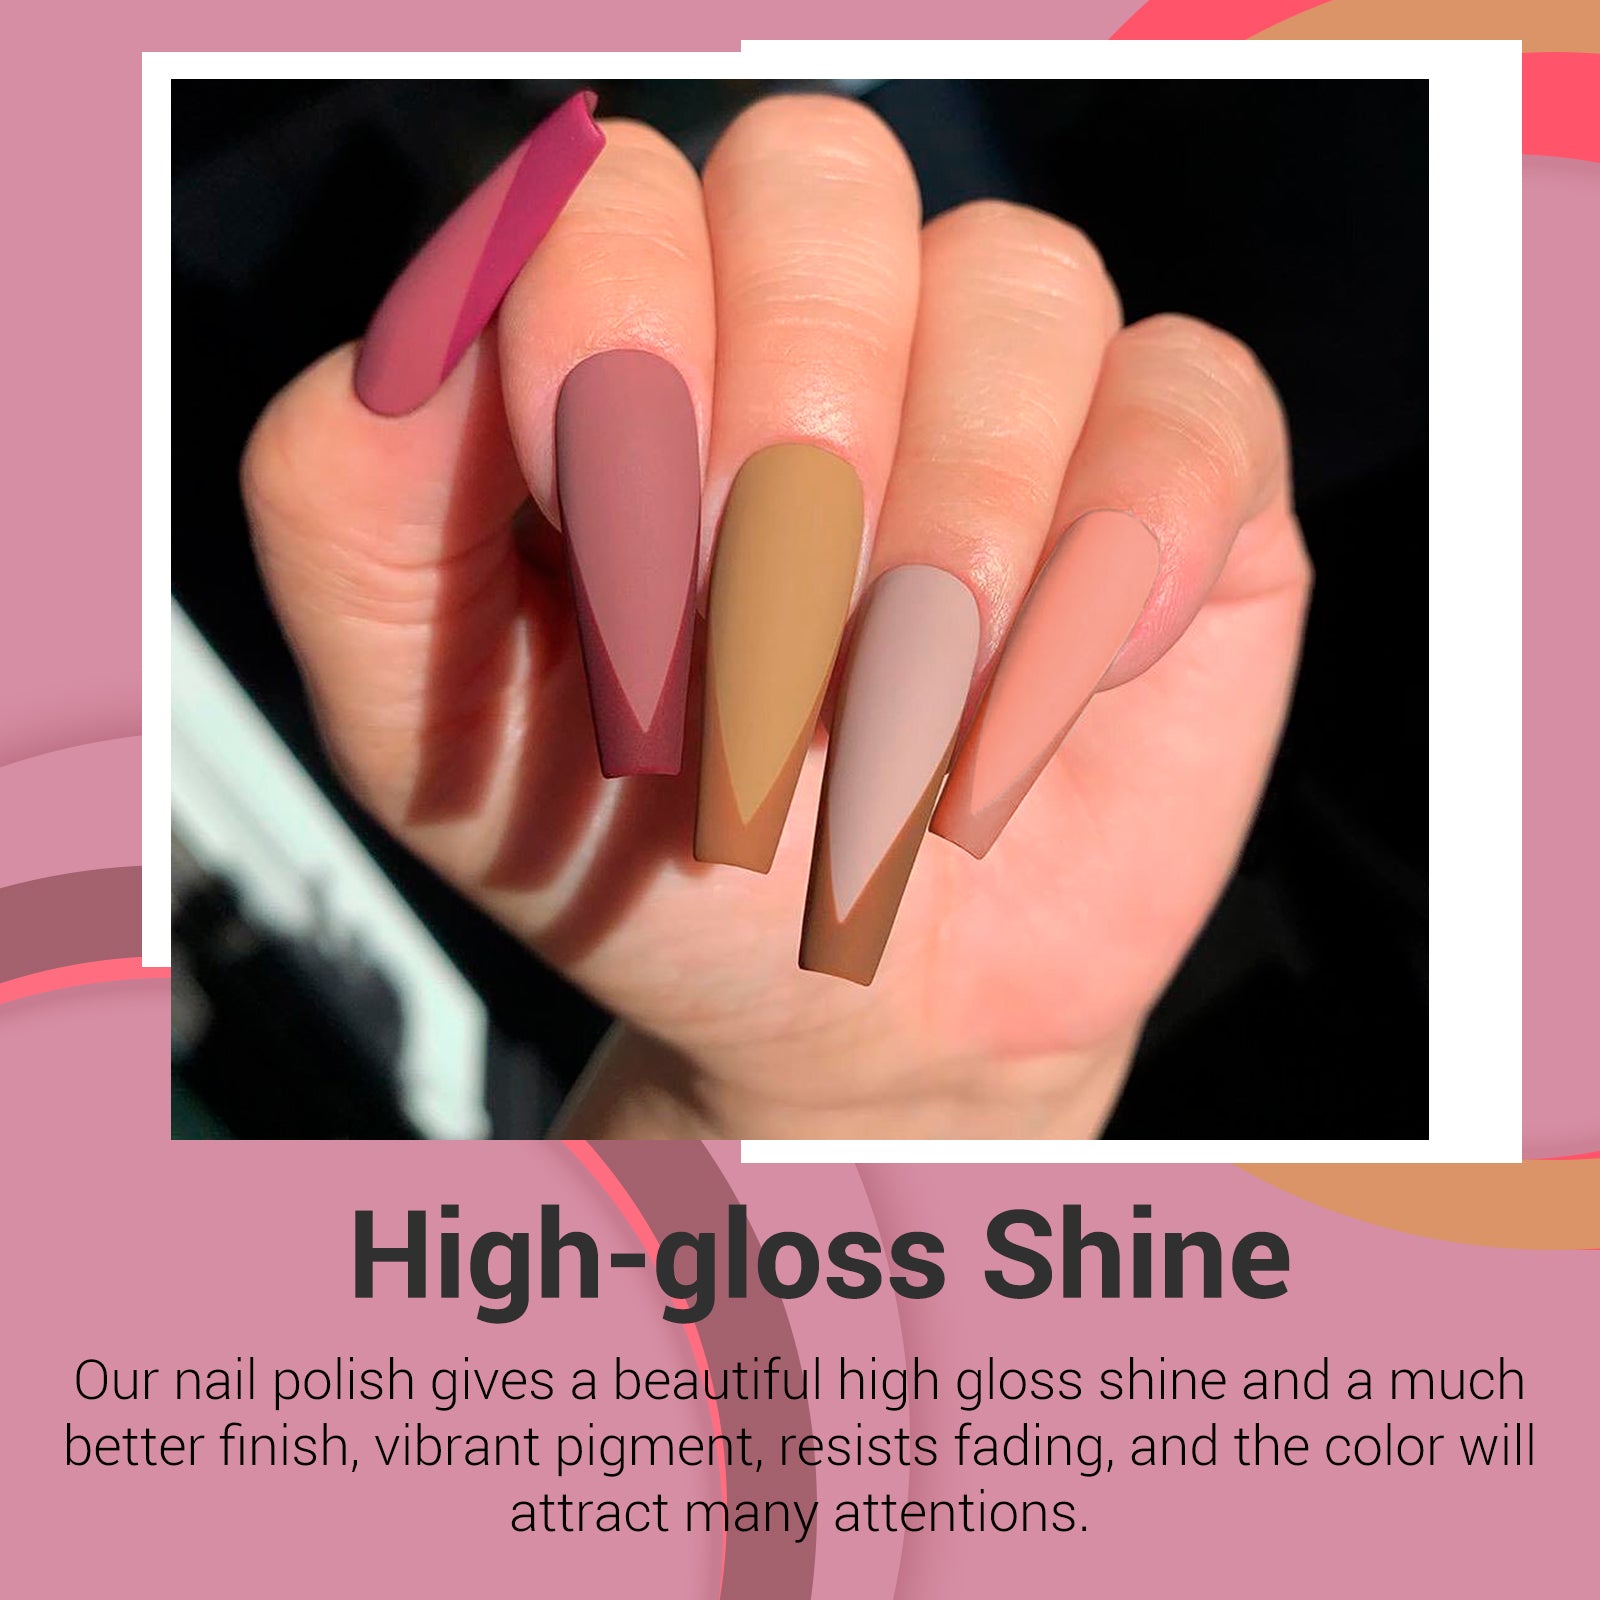 125 Nude Nail Designs For A Charming Manicure | Gel nails, Heart nail  designs, Nail colors